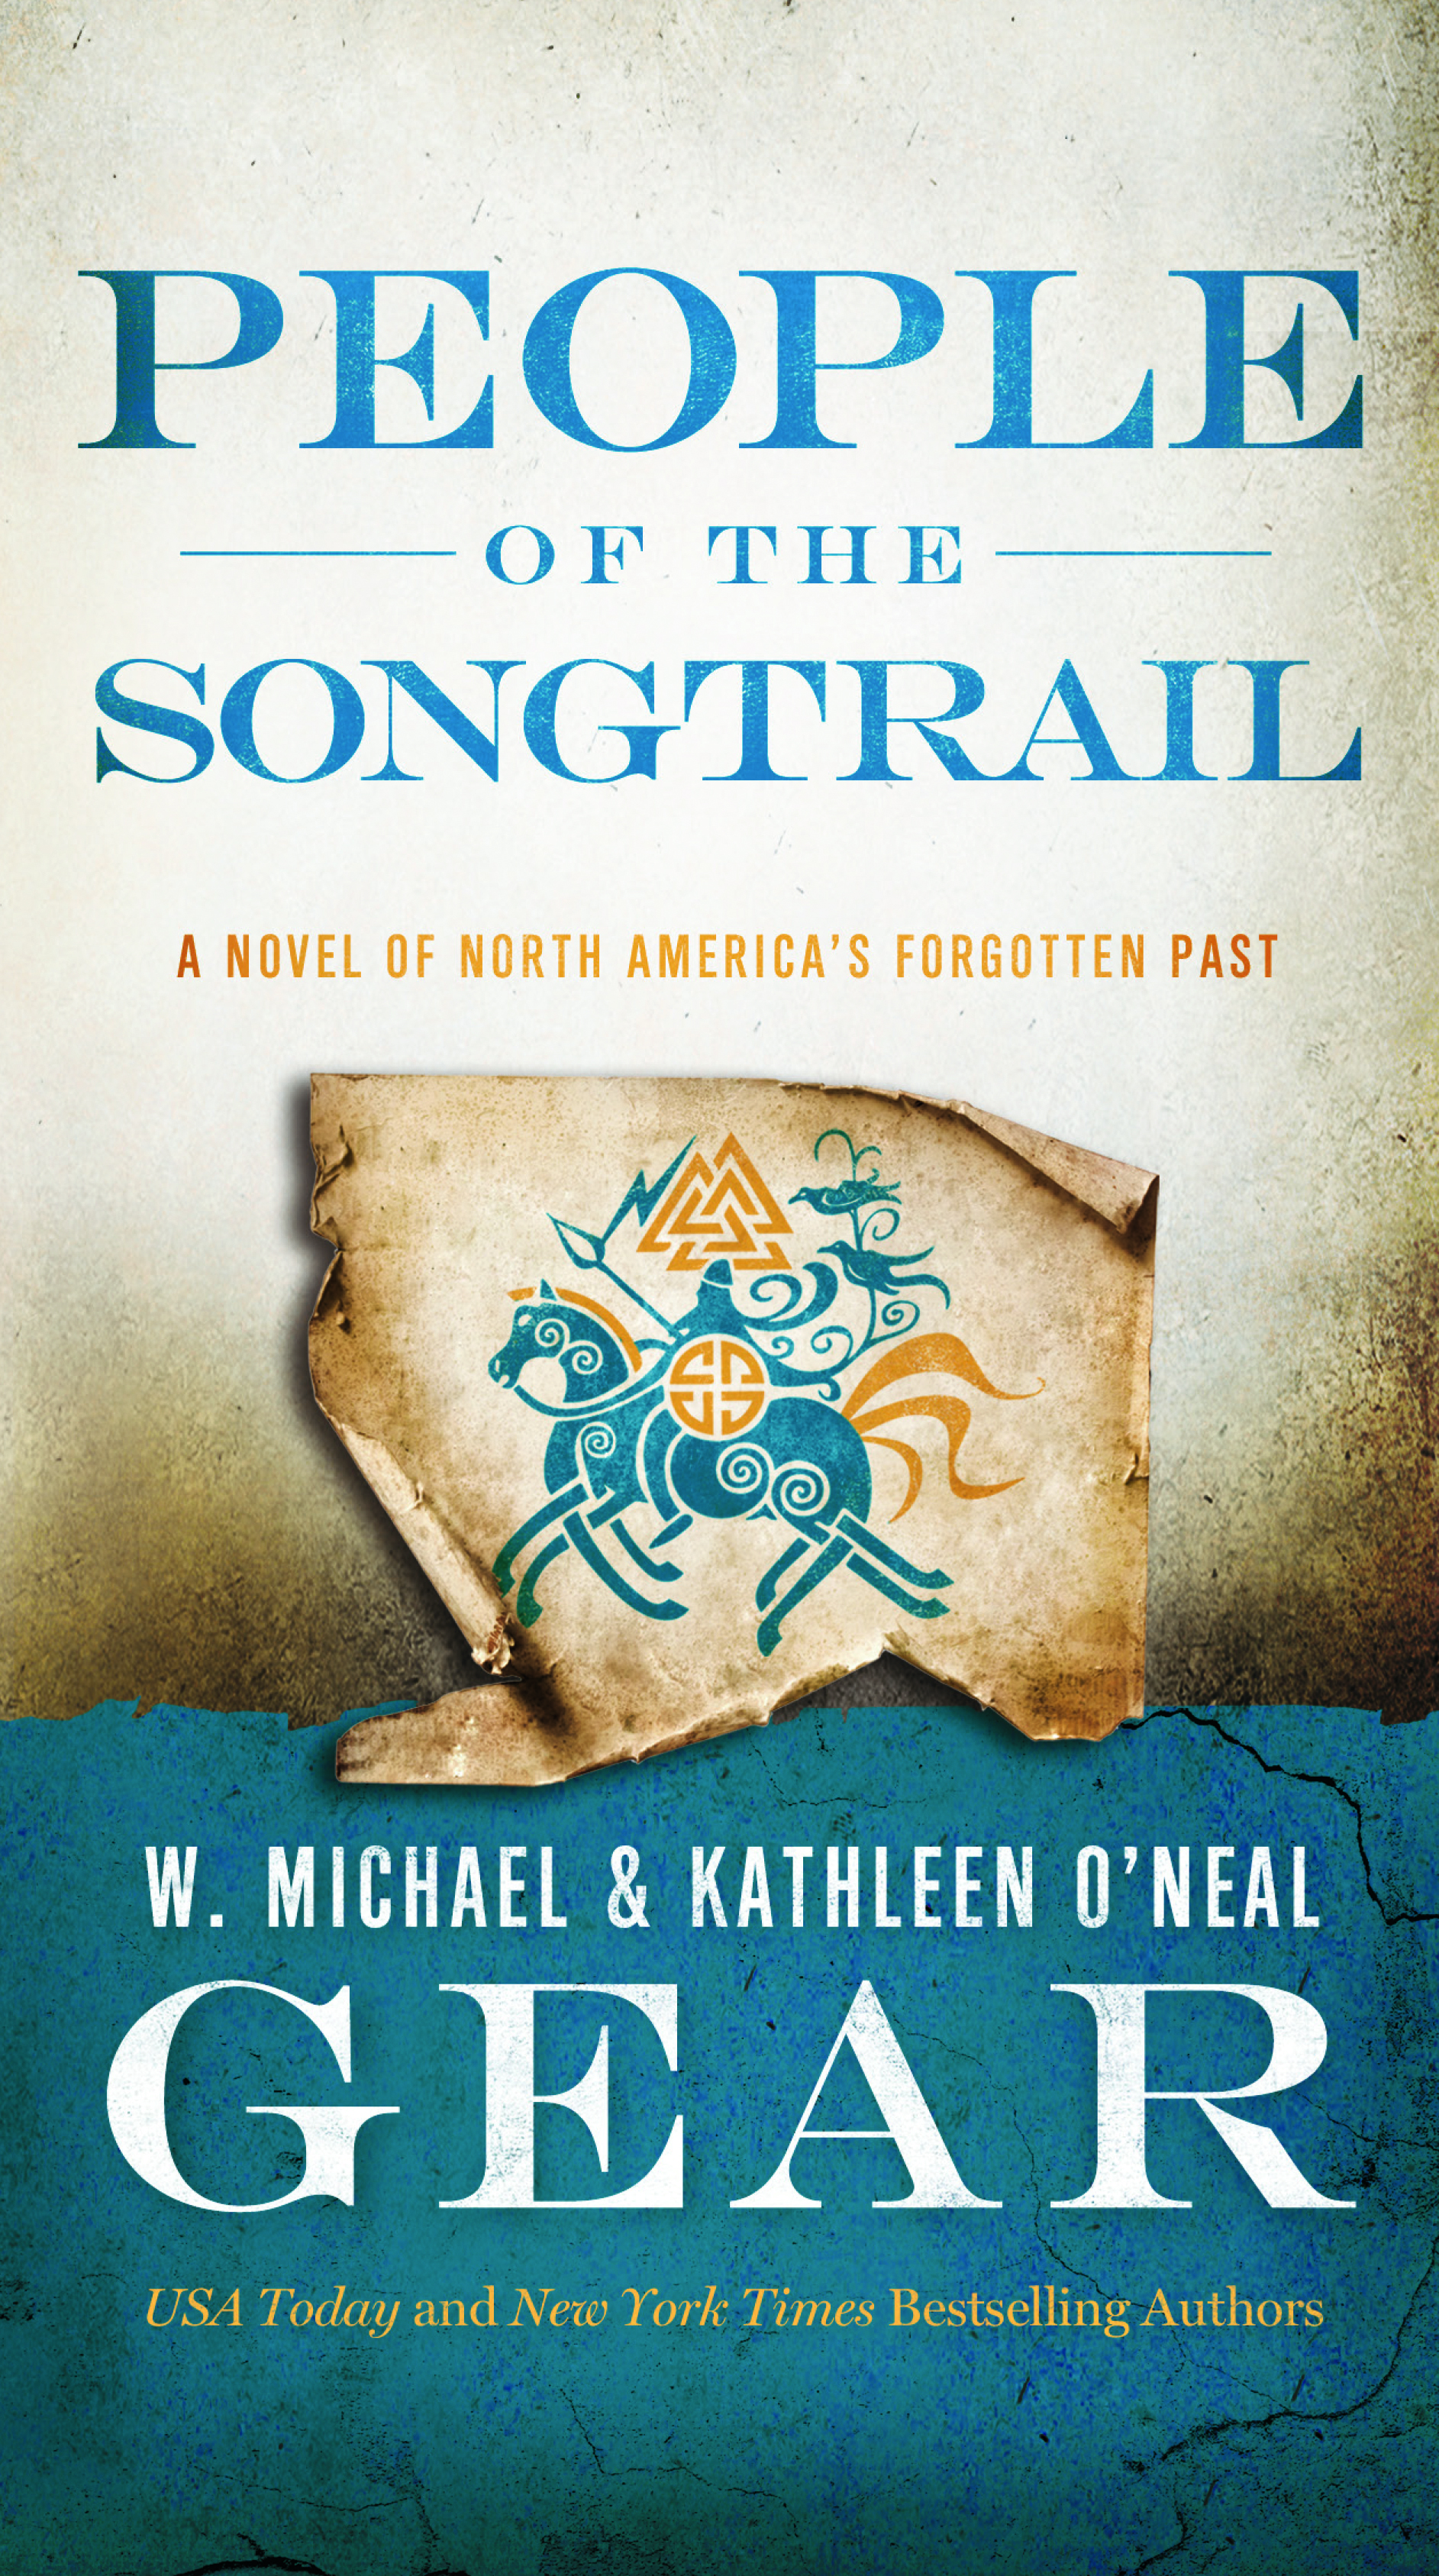 People of the Songtrail : A Novel of North America's Forgotten Past by W. Michael Gear, Kathleen O'Neal Gear